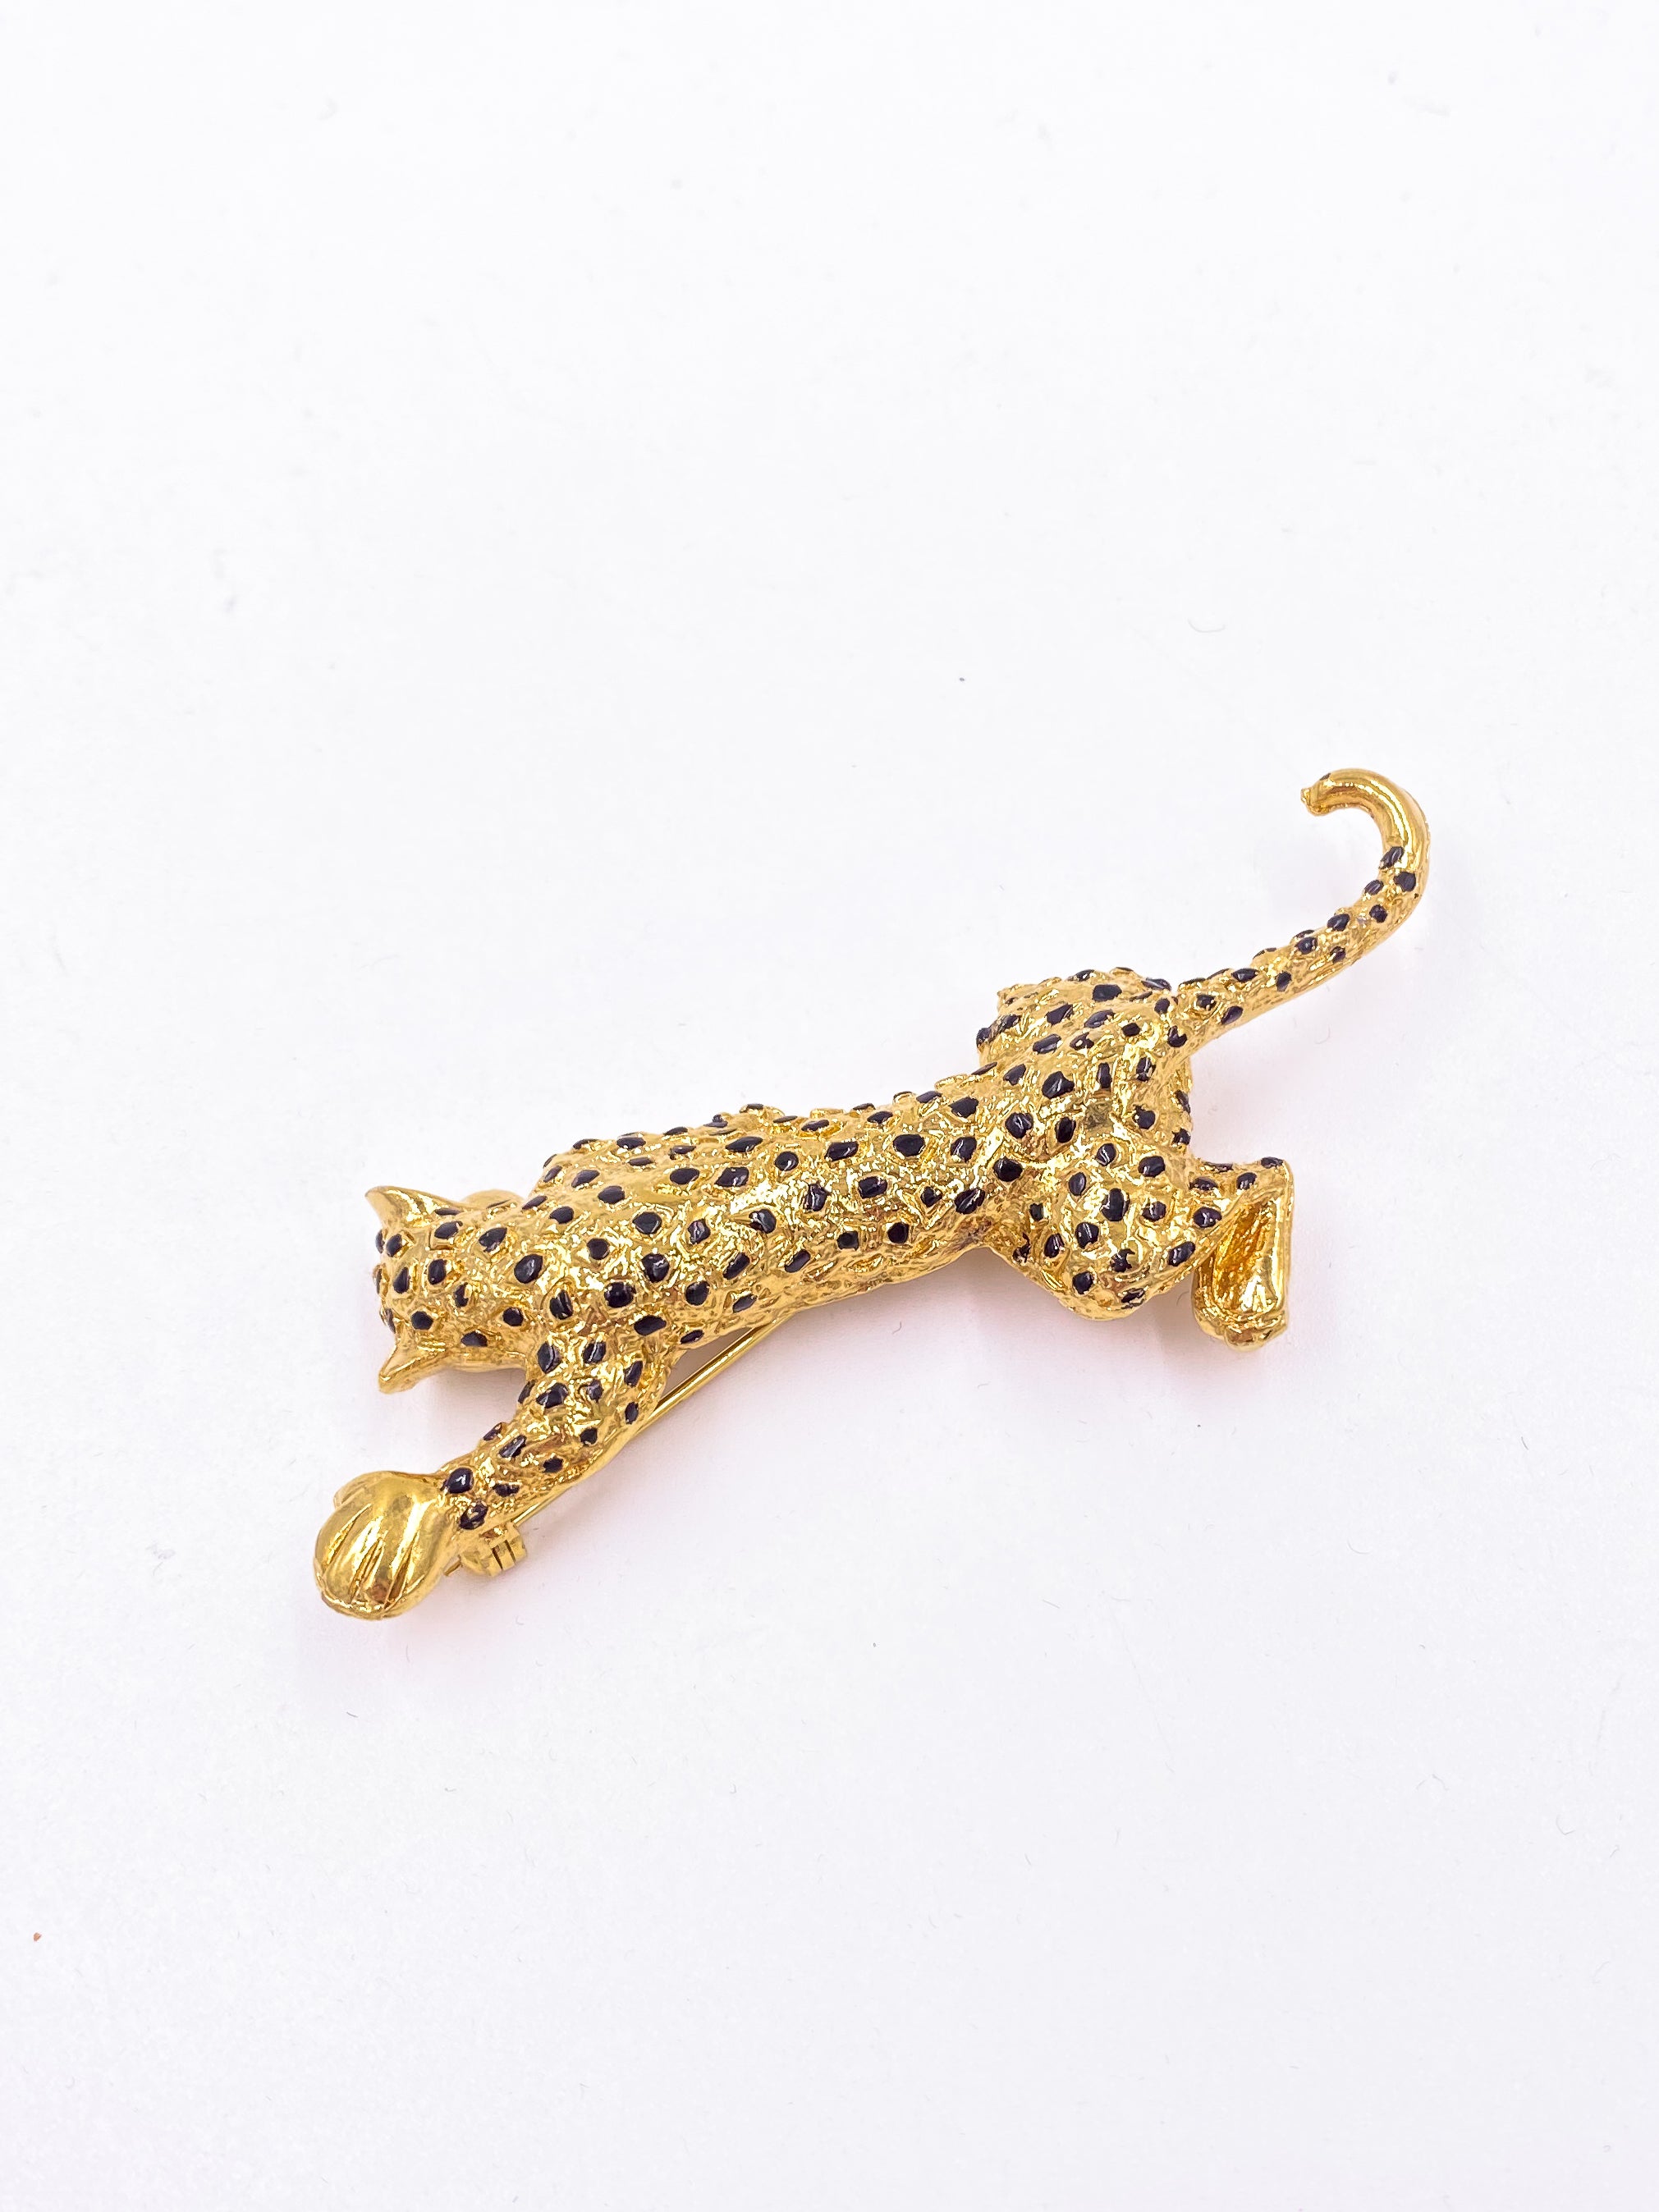 Spotted Panther Brooch